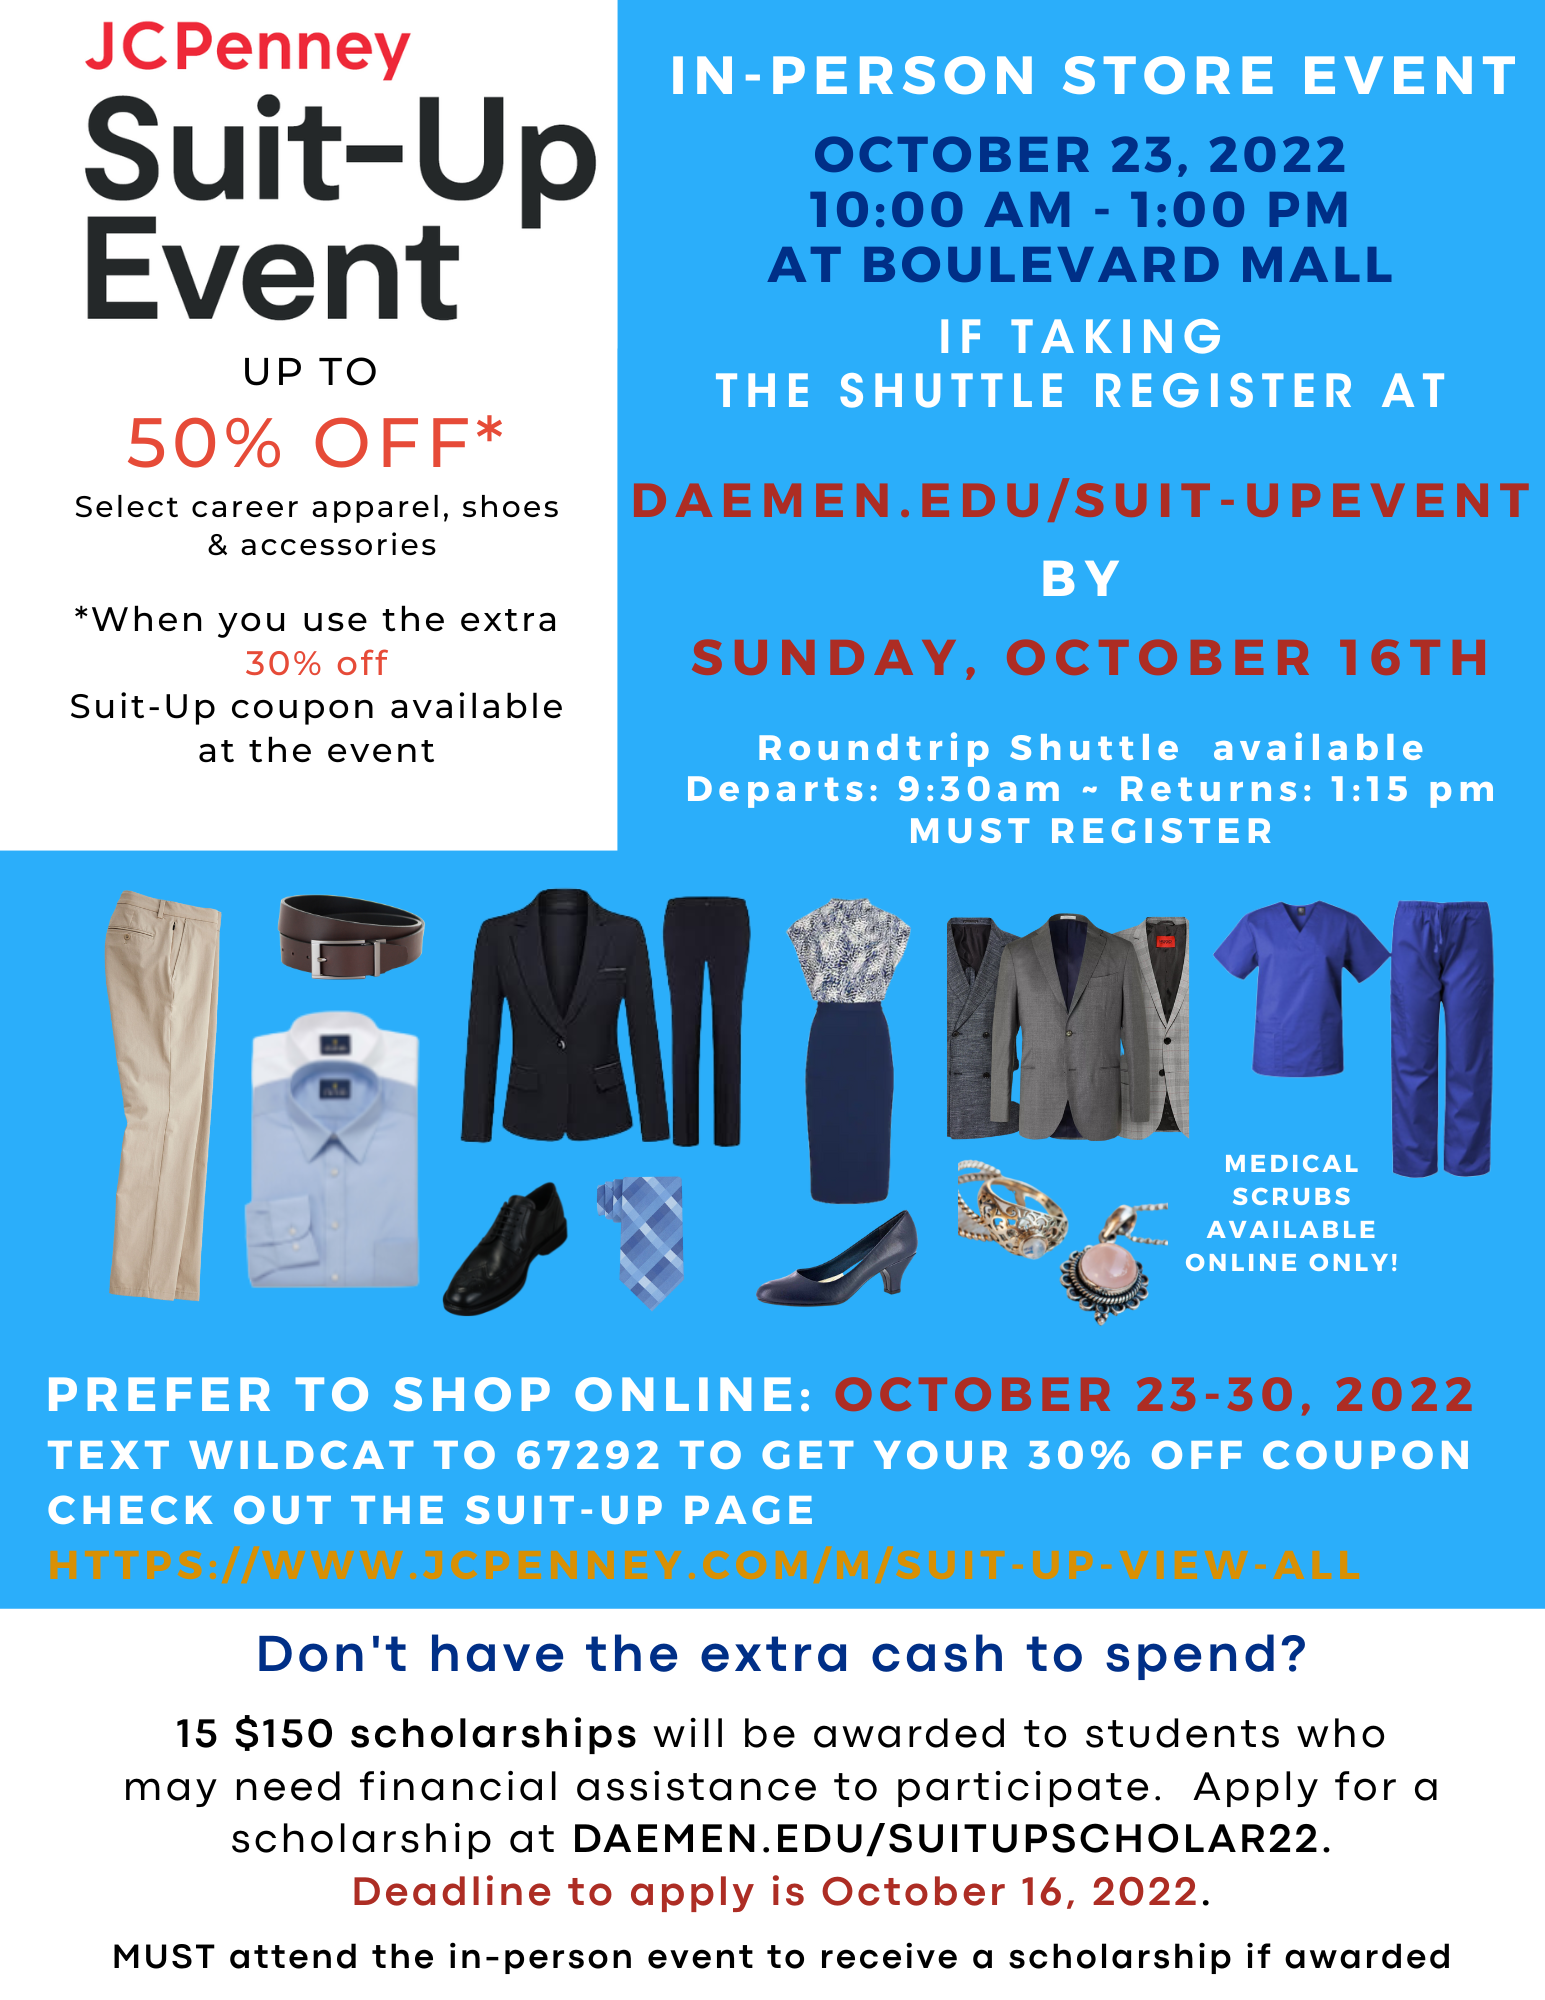 JC Penney Suit-up Event - October 23, 2022